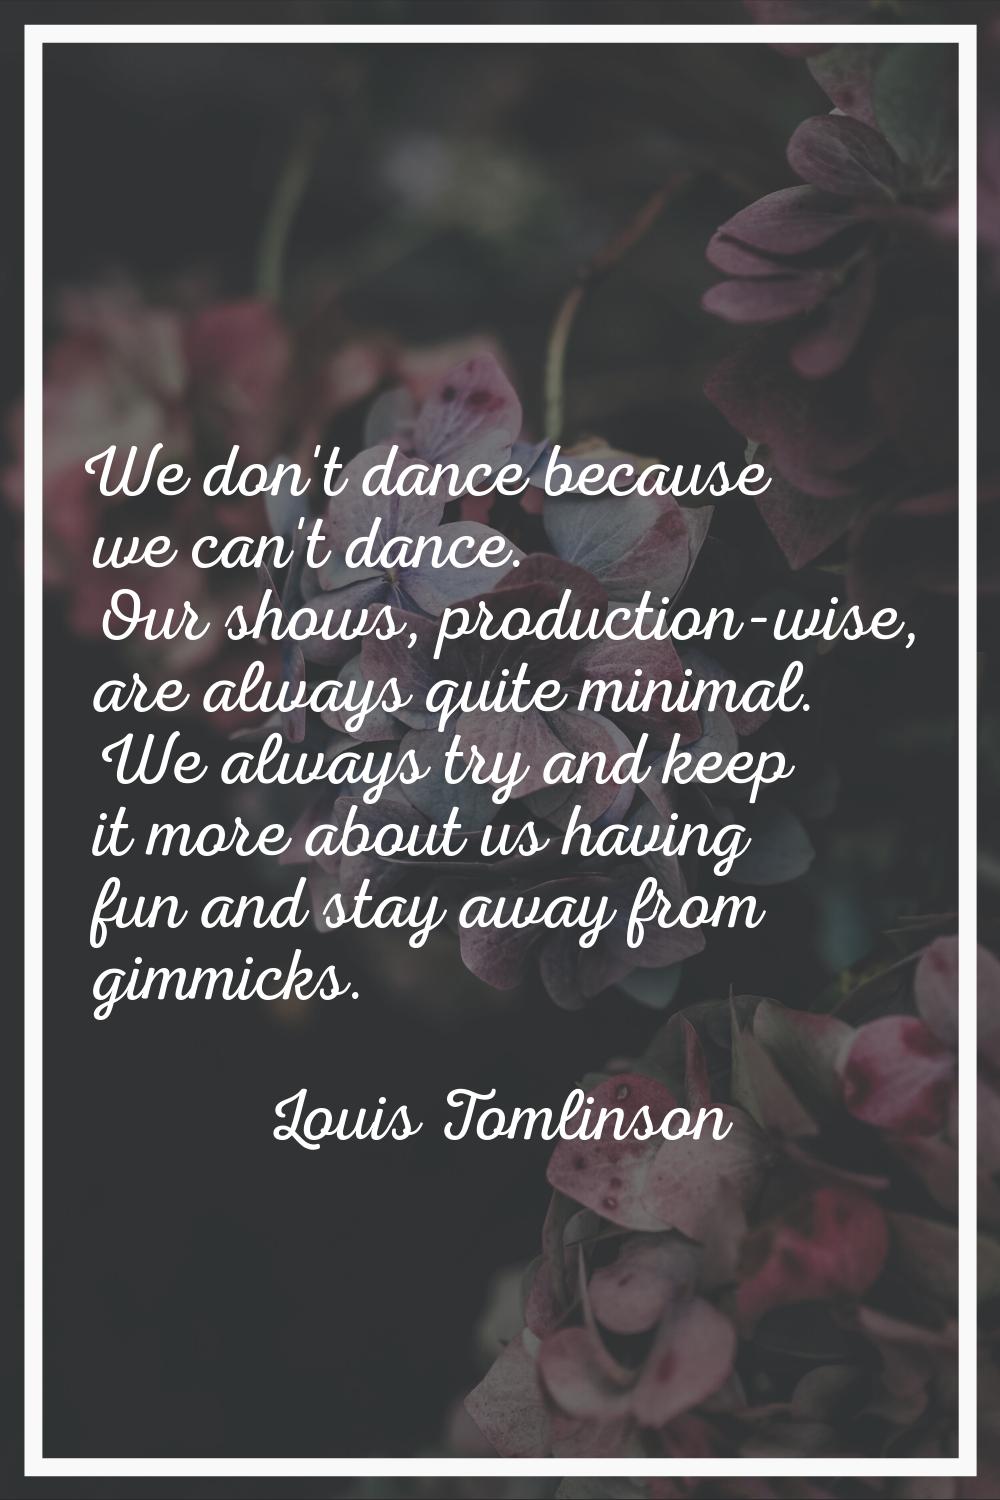 We don't dance because we can't dance. Our shows, production-wise, are always quite minimal. We alw